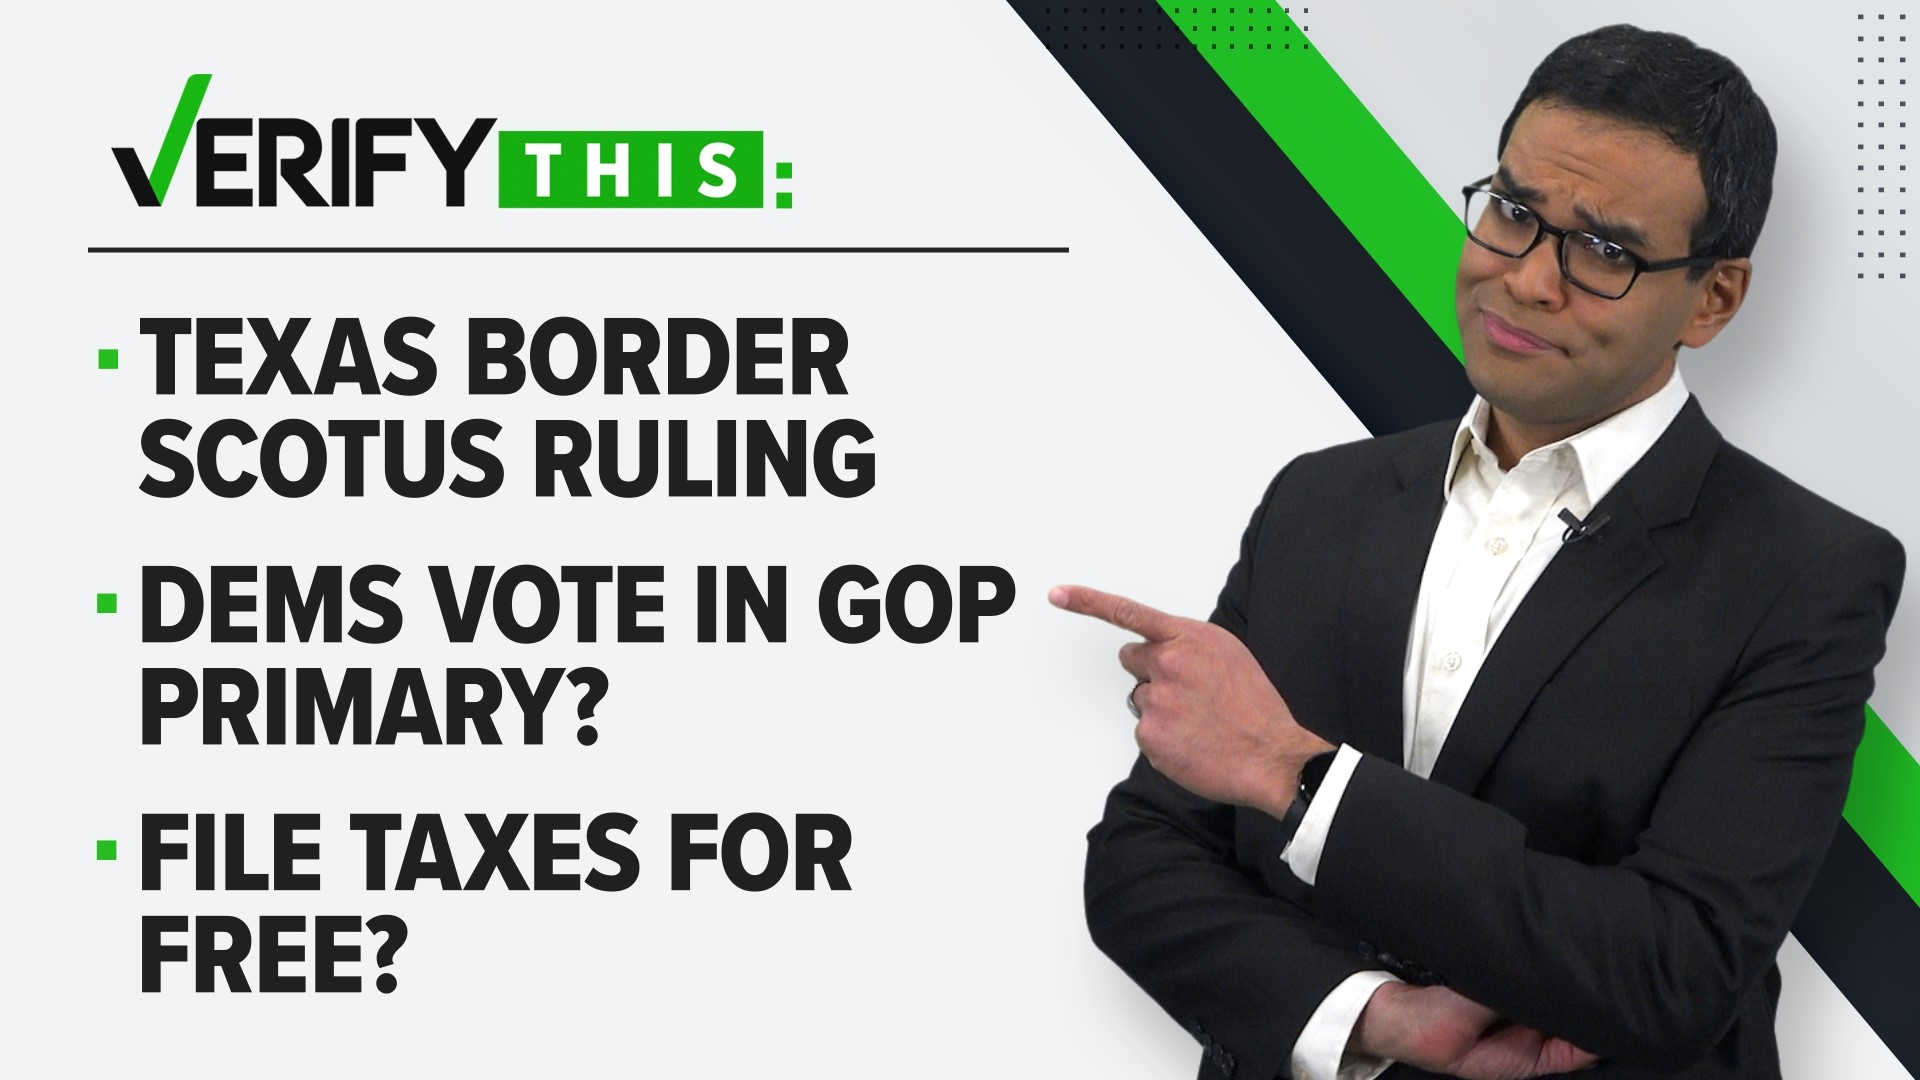 In this week's episode, we verify if Texas is defying an order from the Supreme Court about the border, can Dems vote in a GOP primary & can you file taxes for free